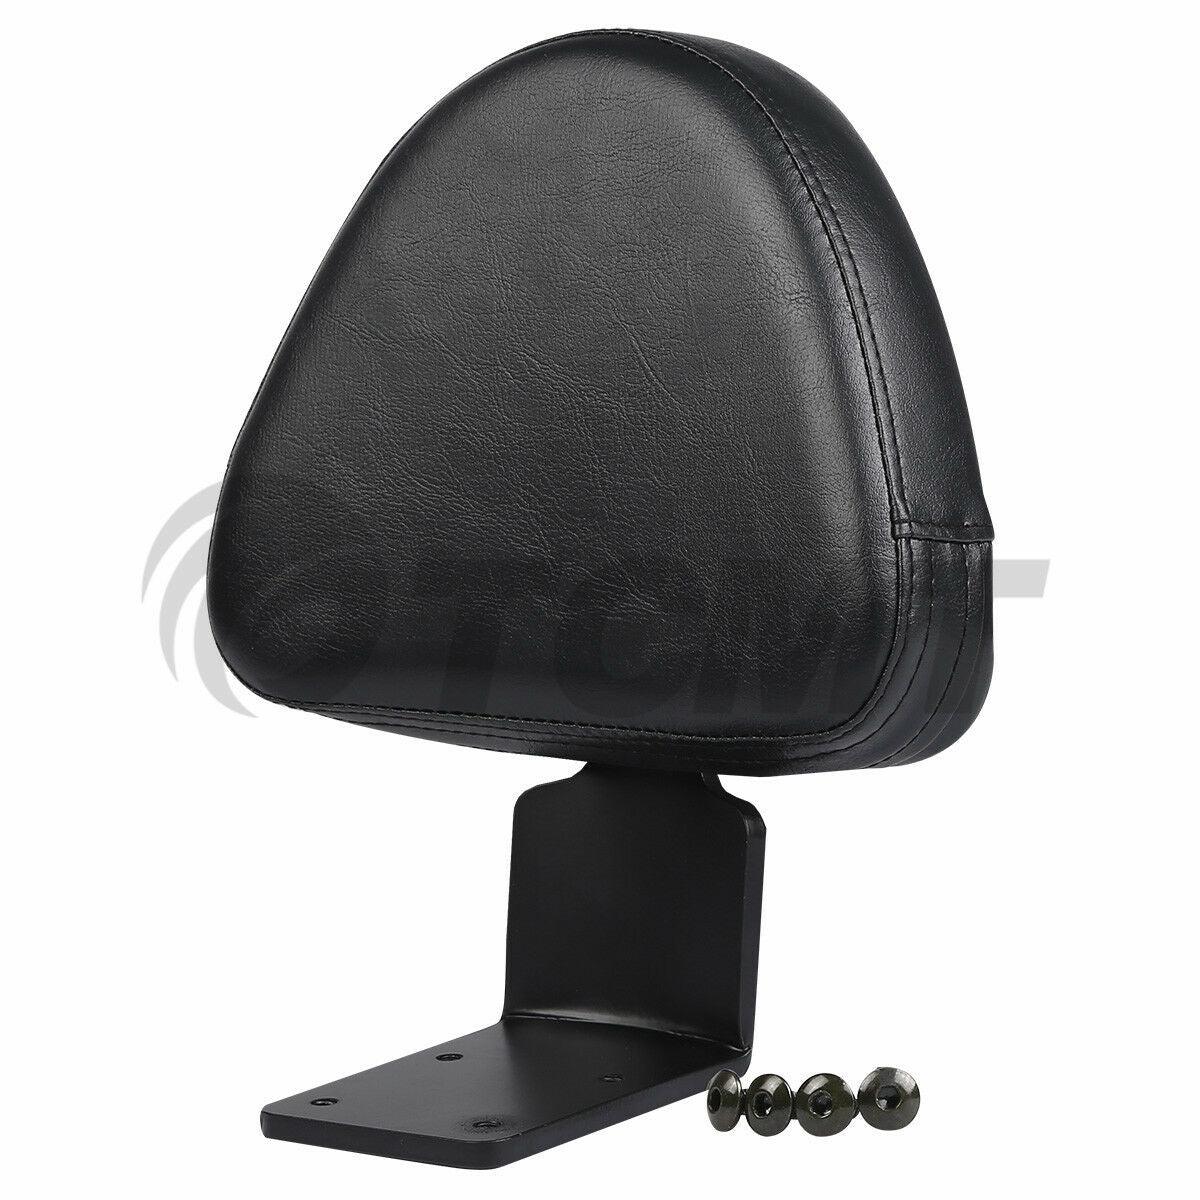 Black Backrest Sissy Bar /Passenger Seat /Foot Pegs Fit For Victory Gunner Vegas - Moto Life Products